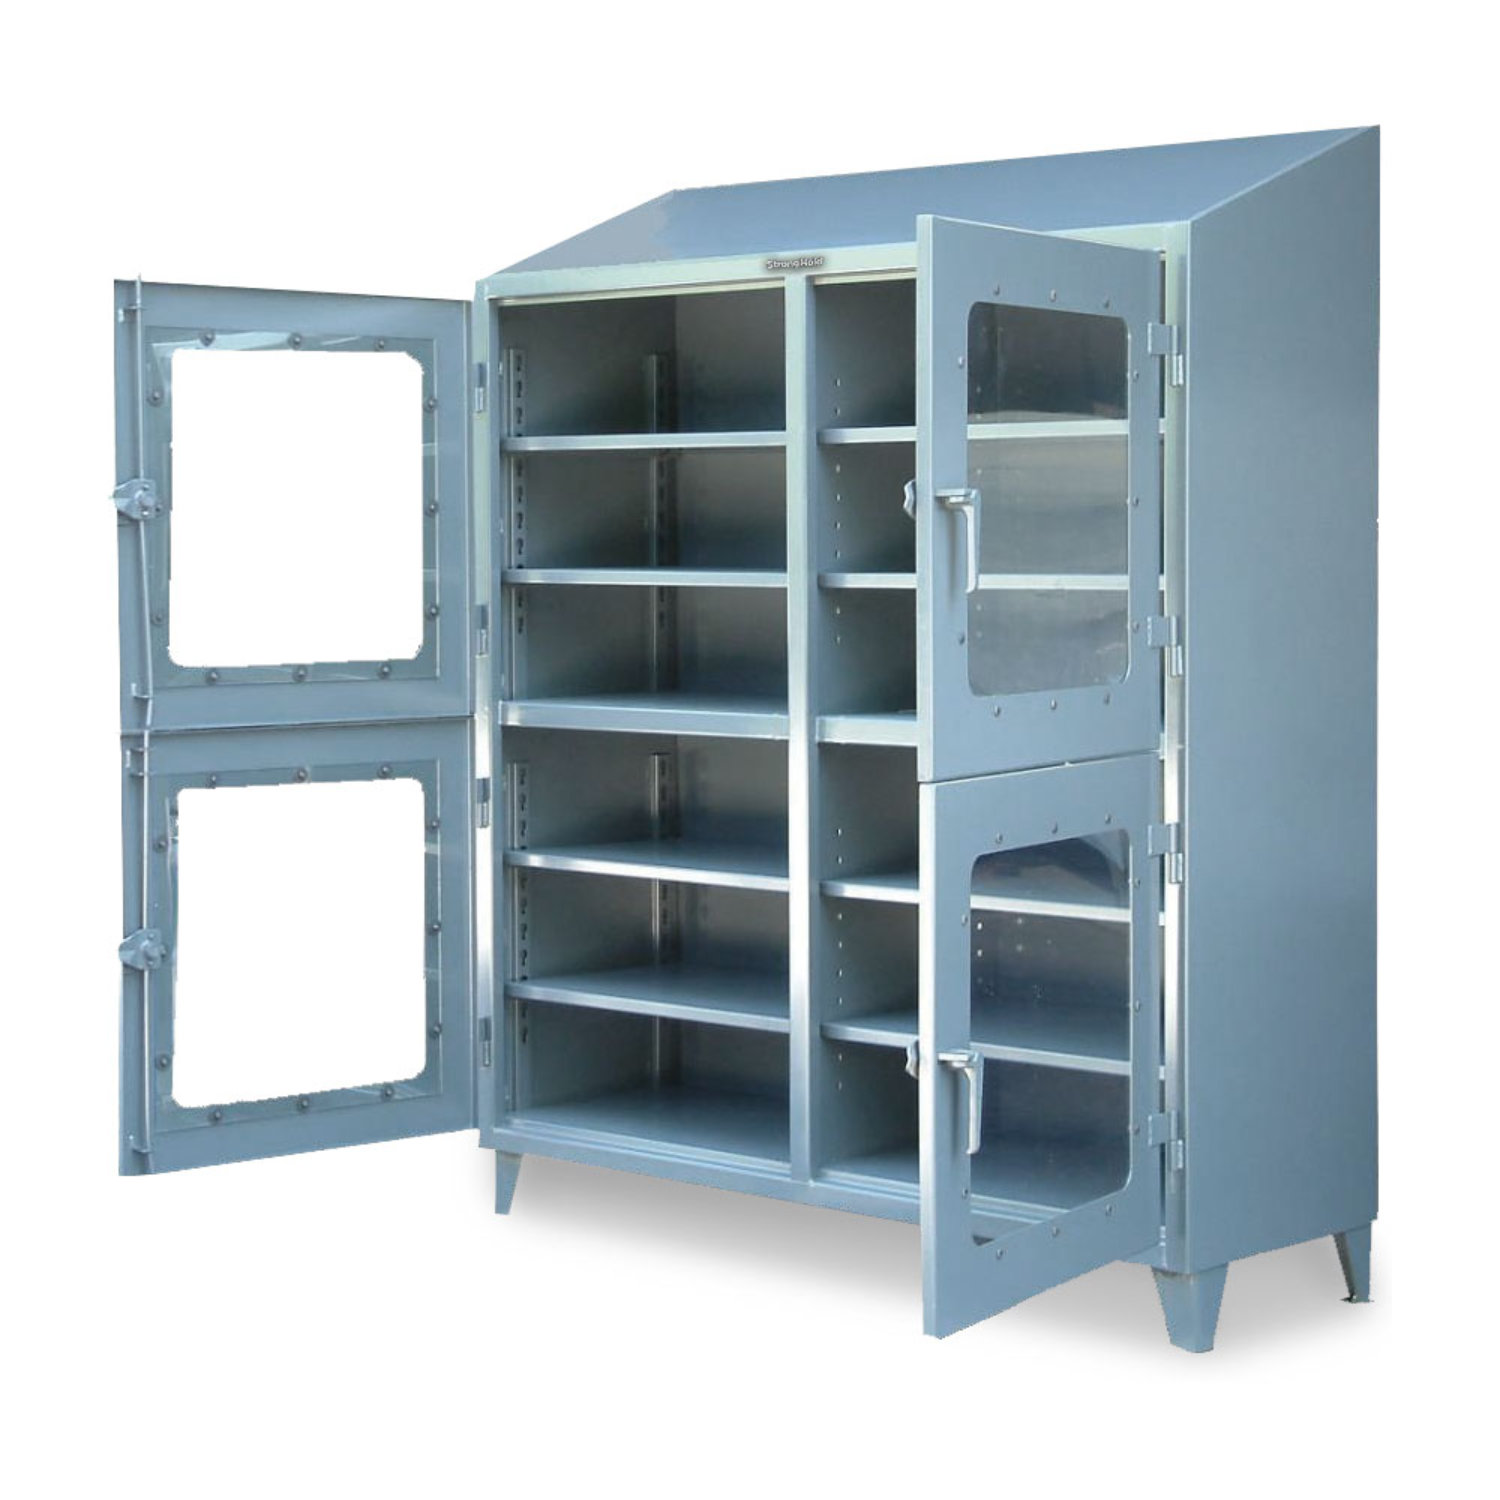 https://madeinusatools.com/wp-content/uploads/2020/06/clear-view-cabinet-with-4-compartments.jpg